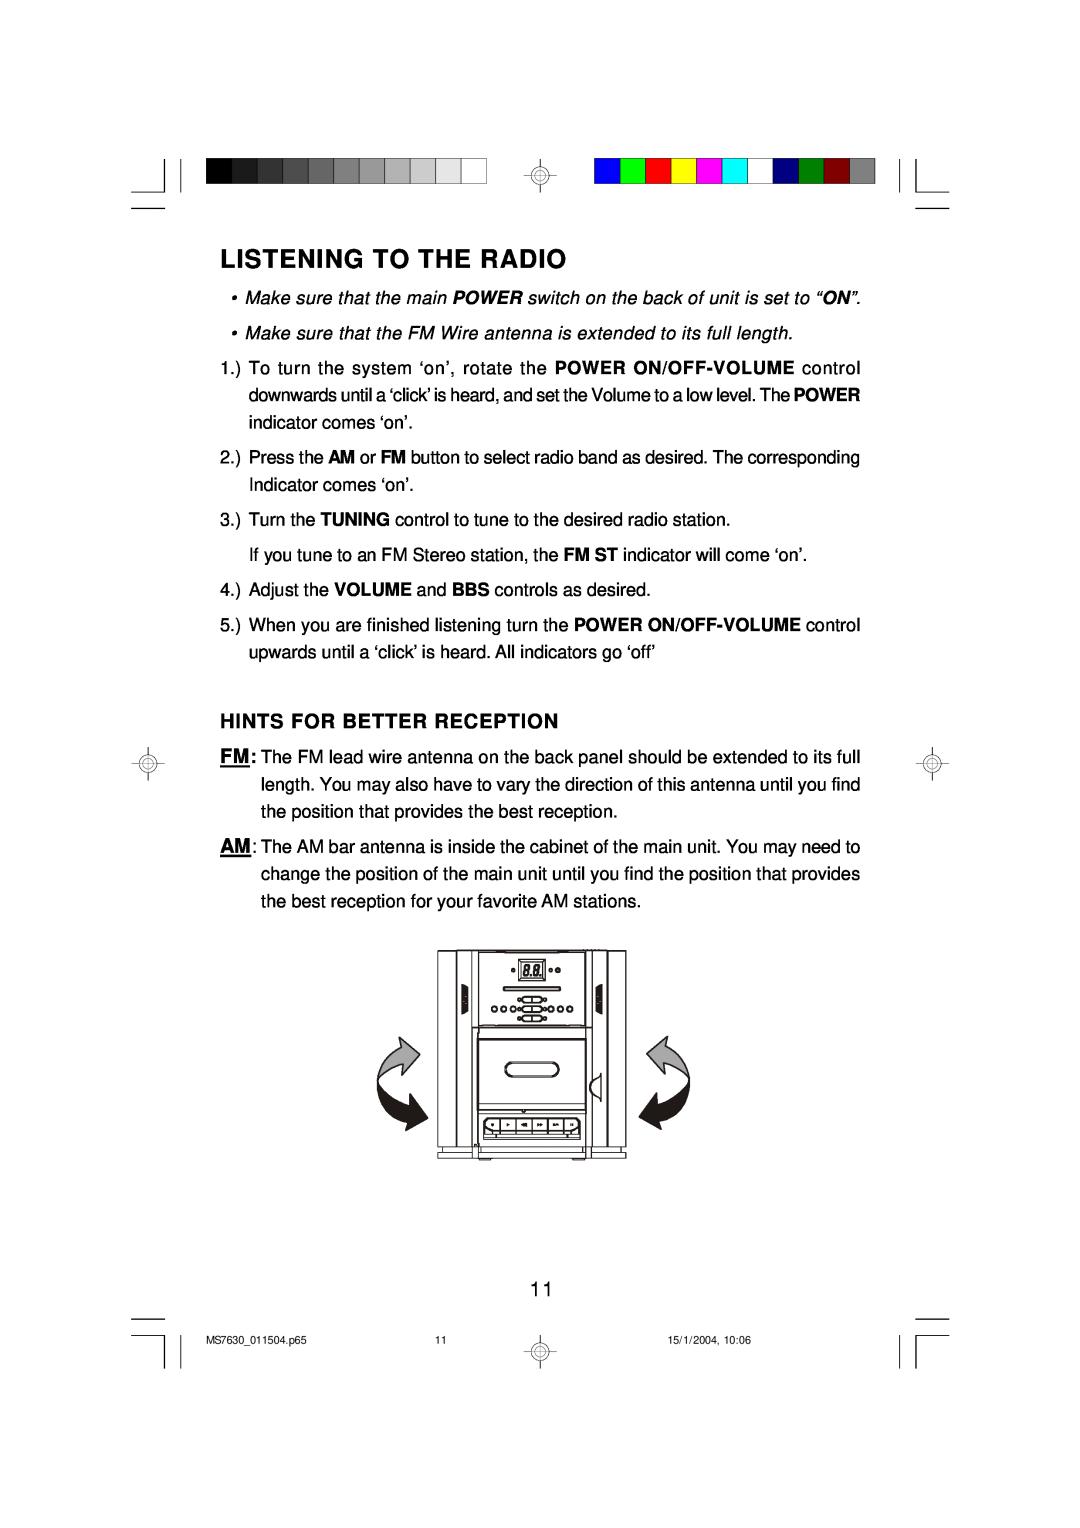 Emerson MS7630 owner manual Listening To The Radio, Hints For Better Reception 